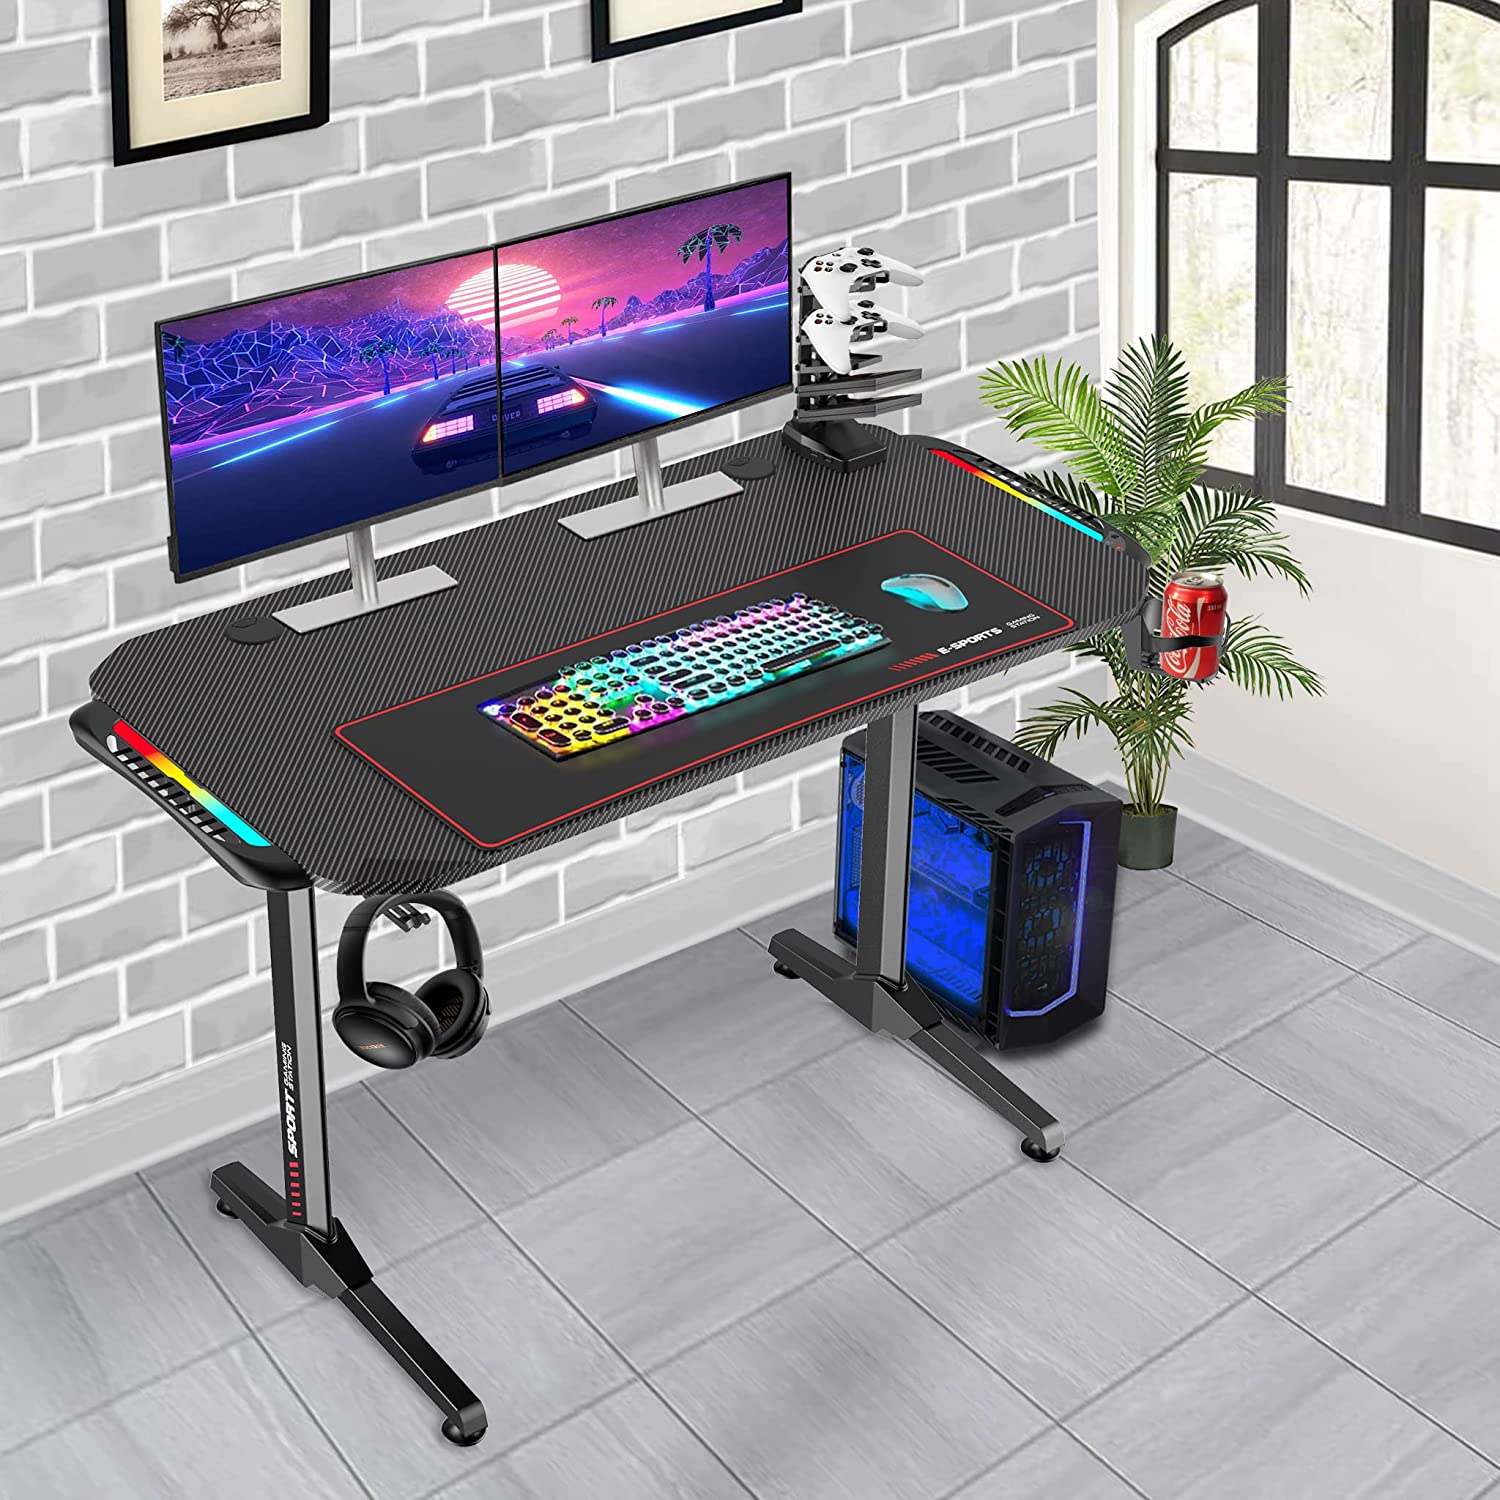 Nupair Gaming Desk T Shaped 47 Inch, PC Gamer Desk for Gaming and Working, Home Office Computer Table with LED Lighting, Mouse Pad, Headphone and Controller Holder, Metal Frame with Wood Top